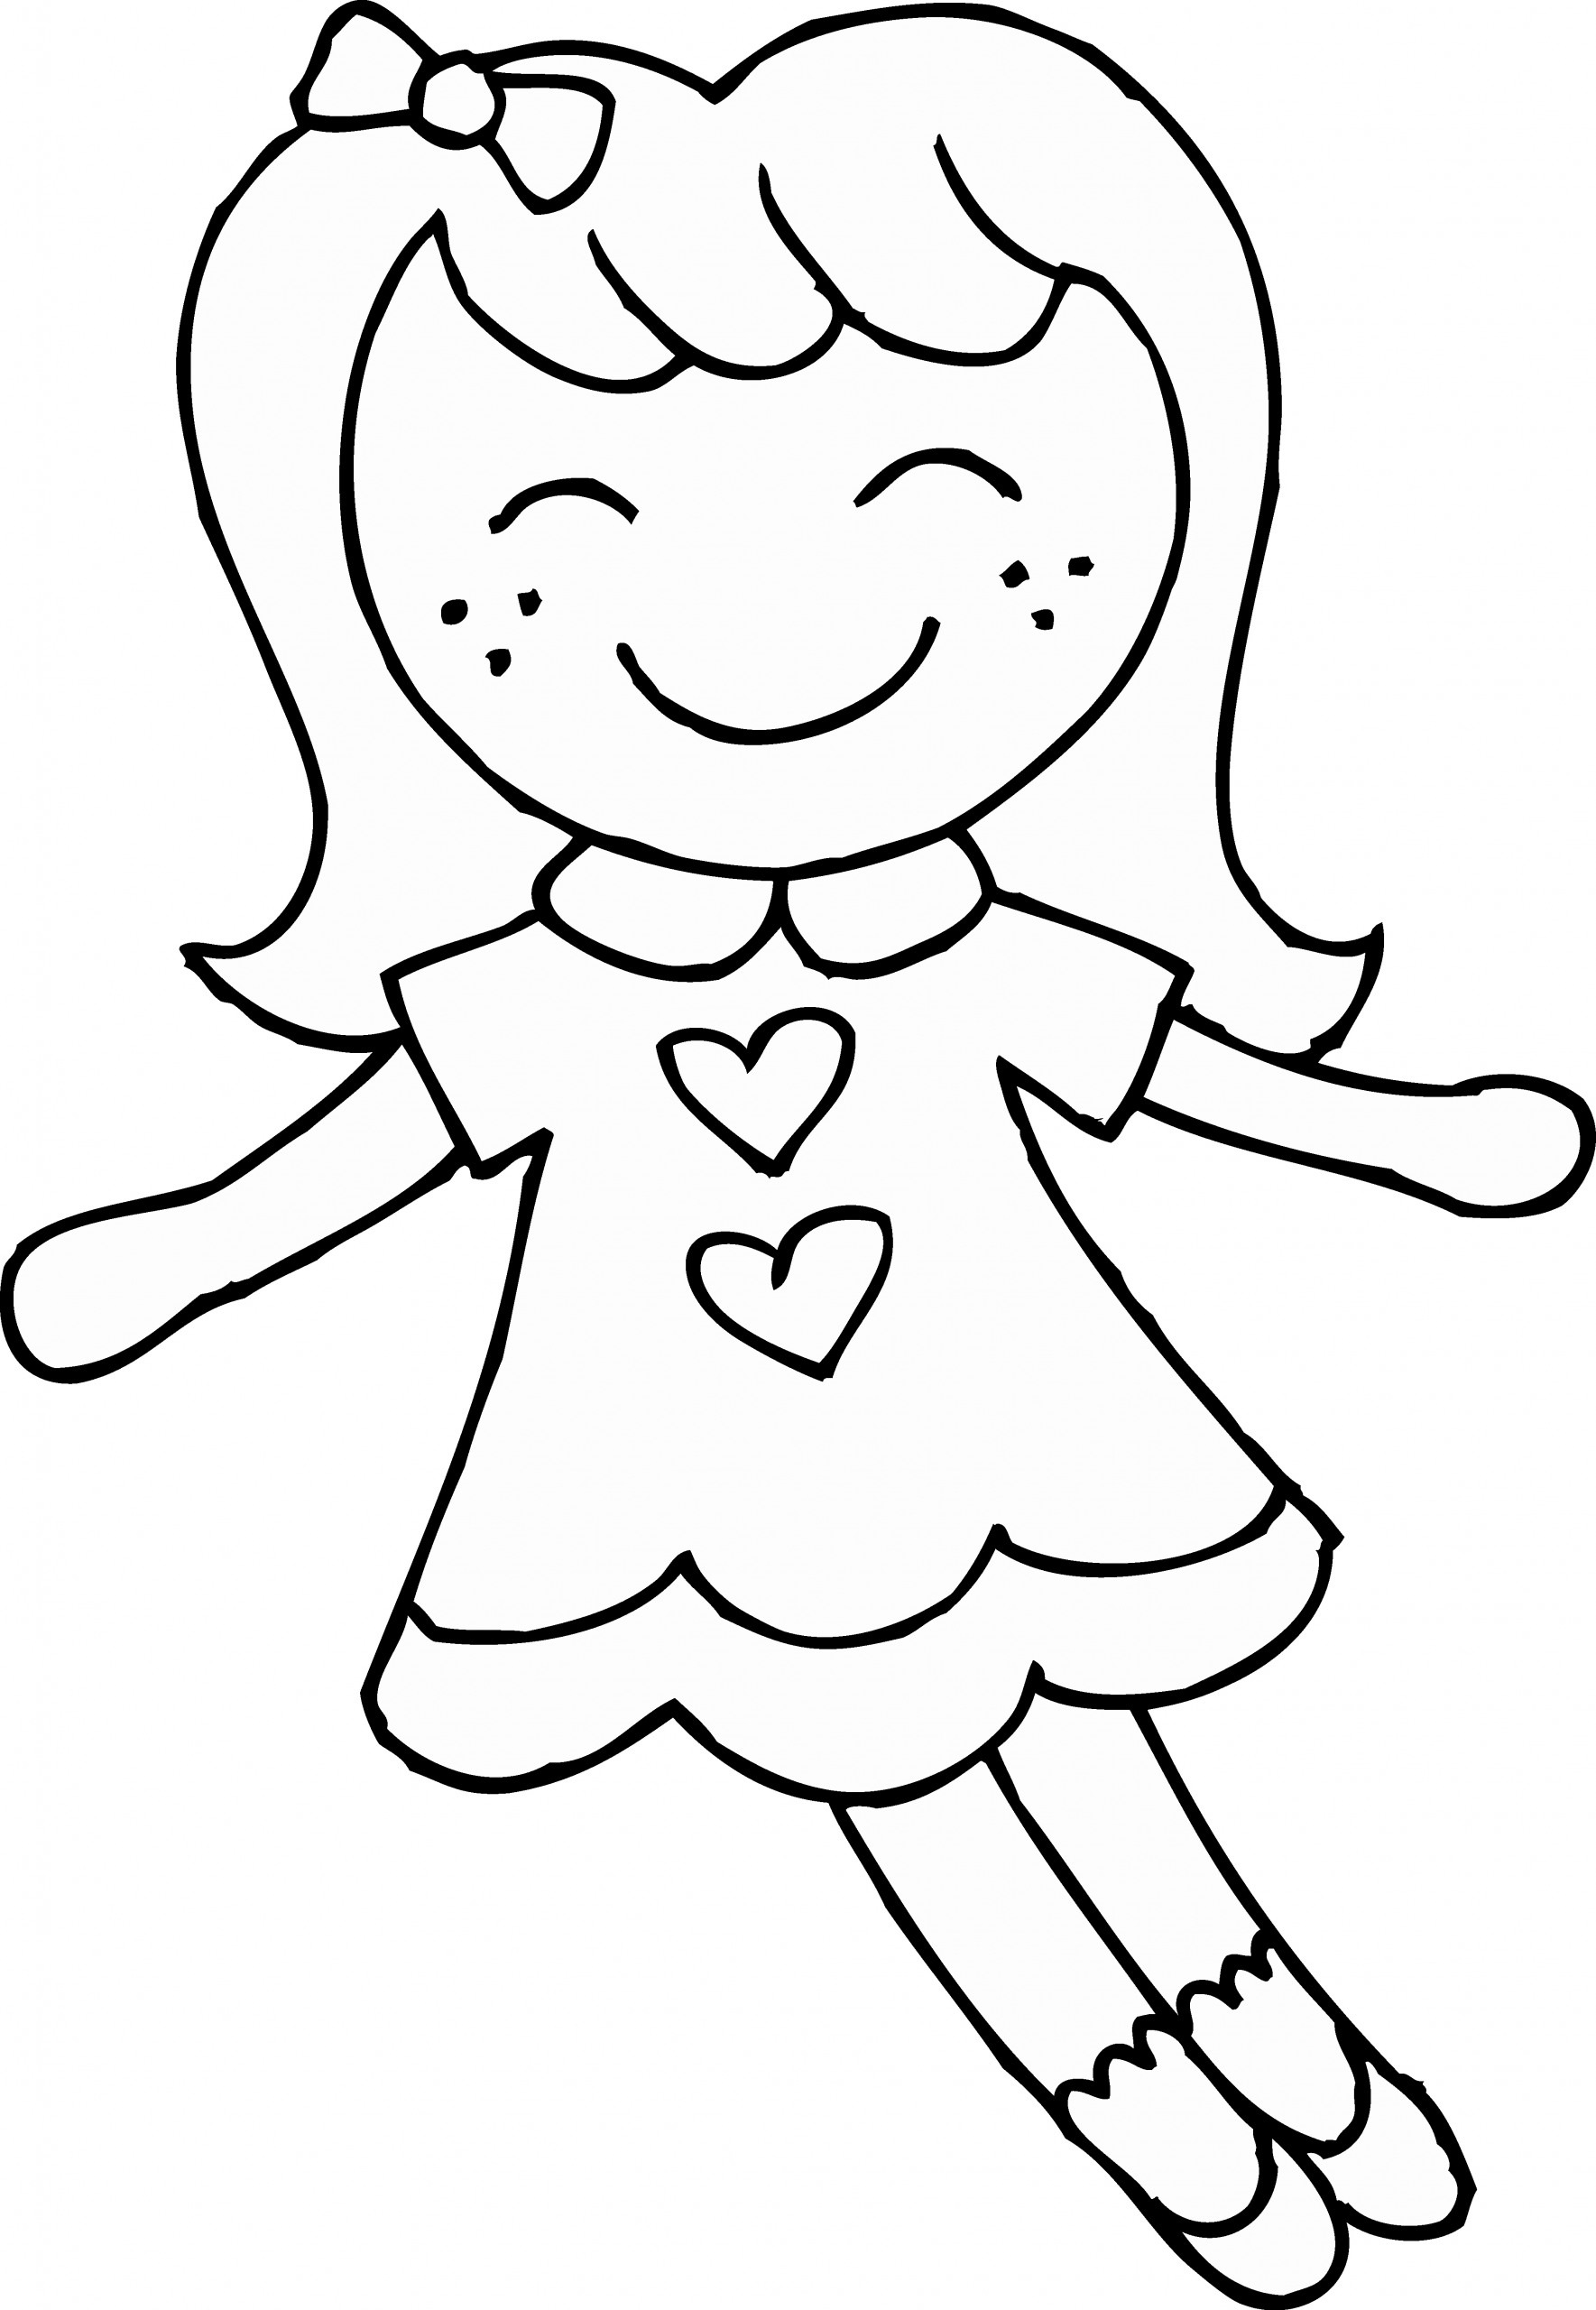 Clip Art Coloring Pages Luxury Cute Dolly Coloring Page Free Clip Art | Coloring  pages, Bird coloring pages, Mickey mouse coloring pages